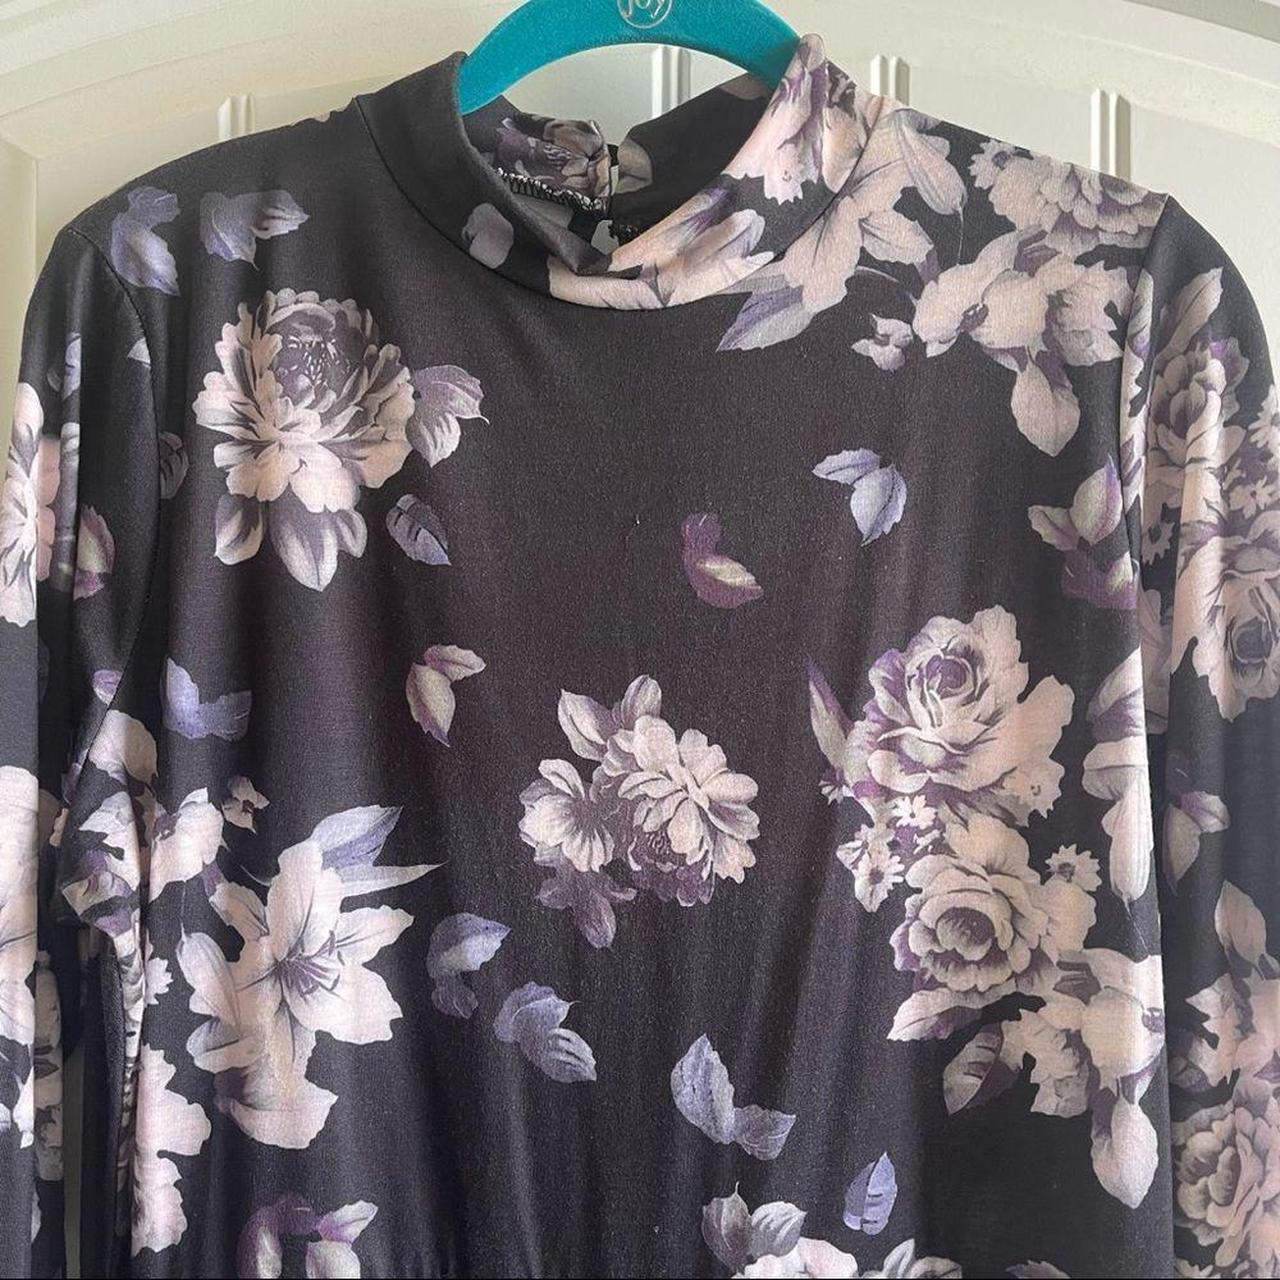 Product Image 3 - Boohoo Black High Neck Floral